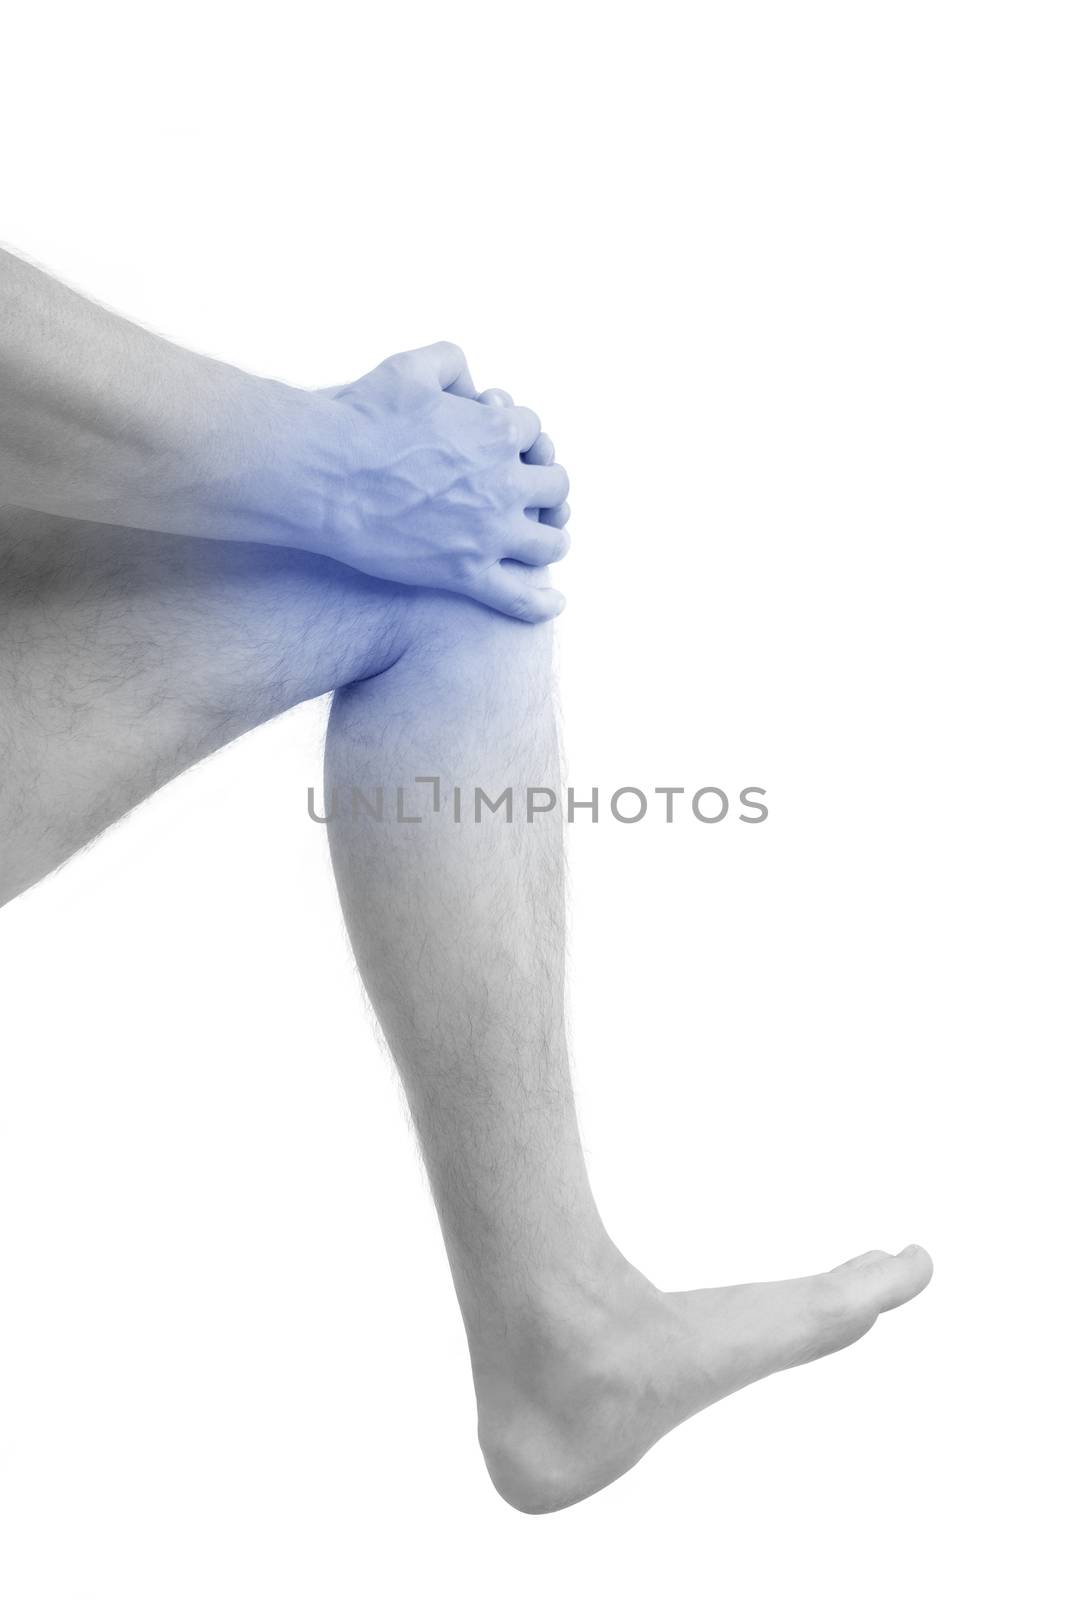 Knee injury. Man holding his knee with highlighted pain are isolated on white background. Cold pain. Knee pain.